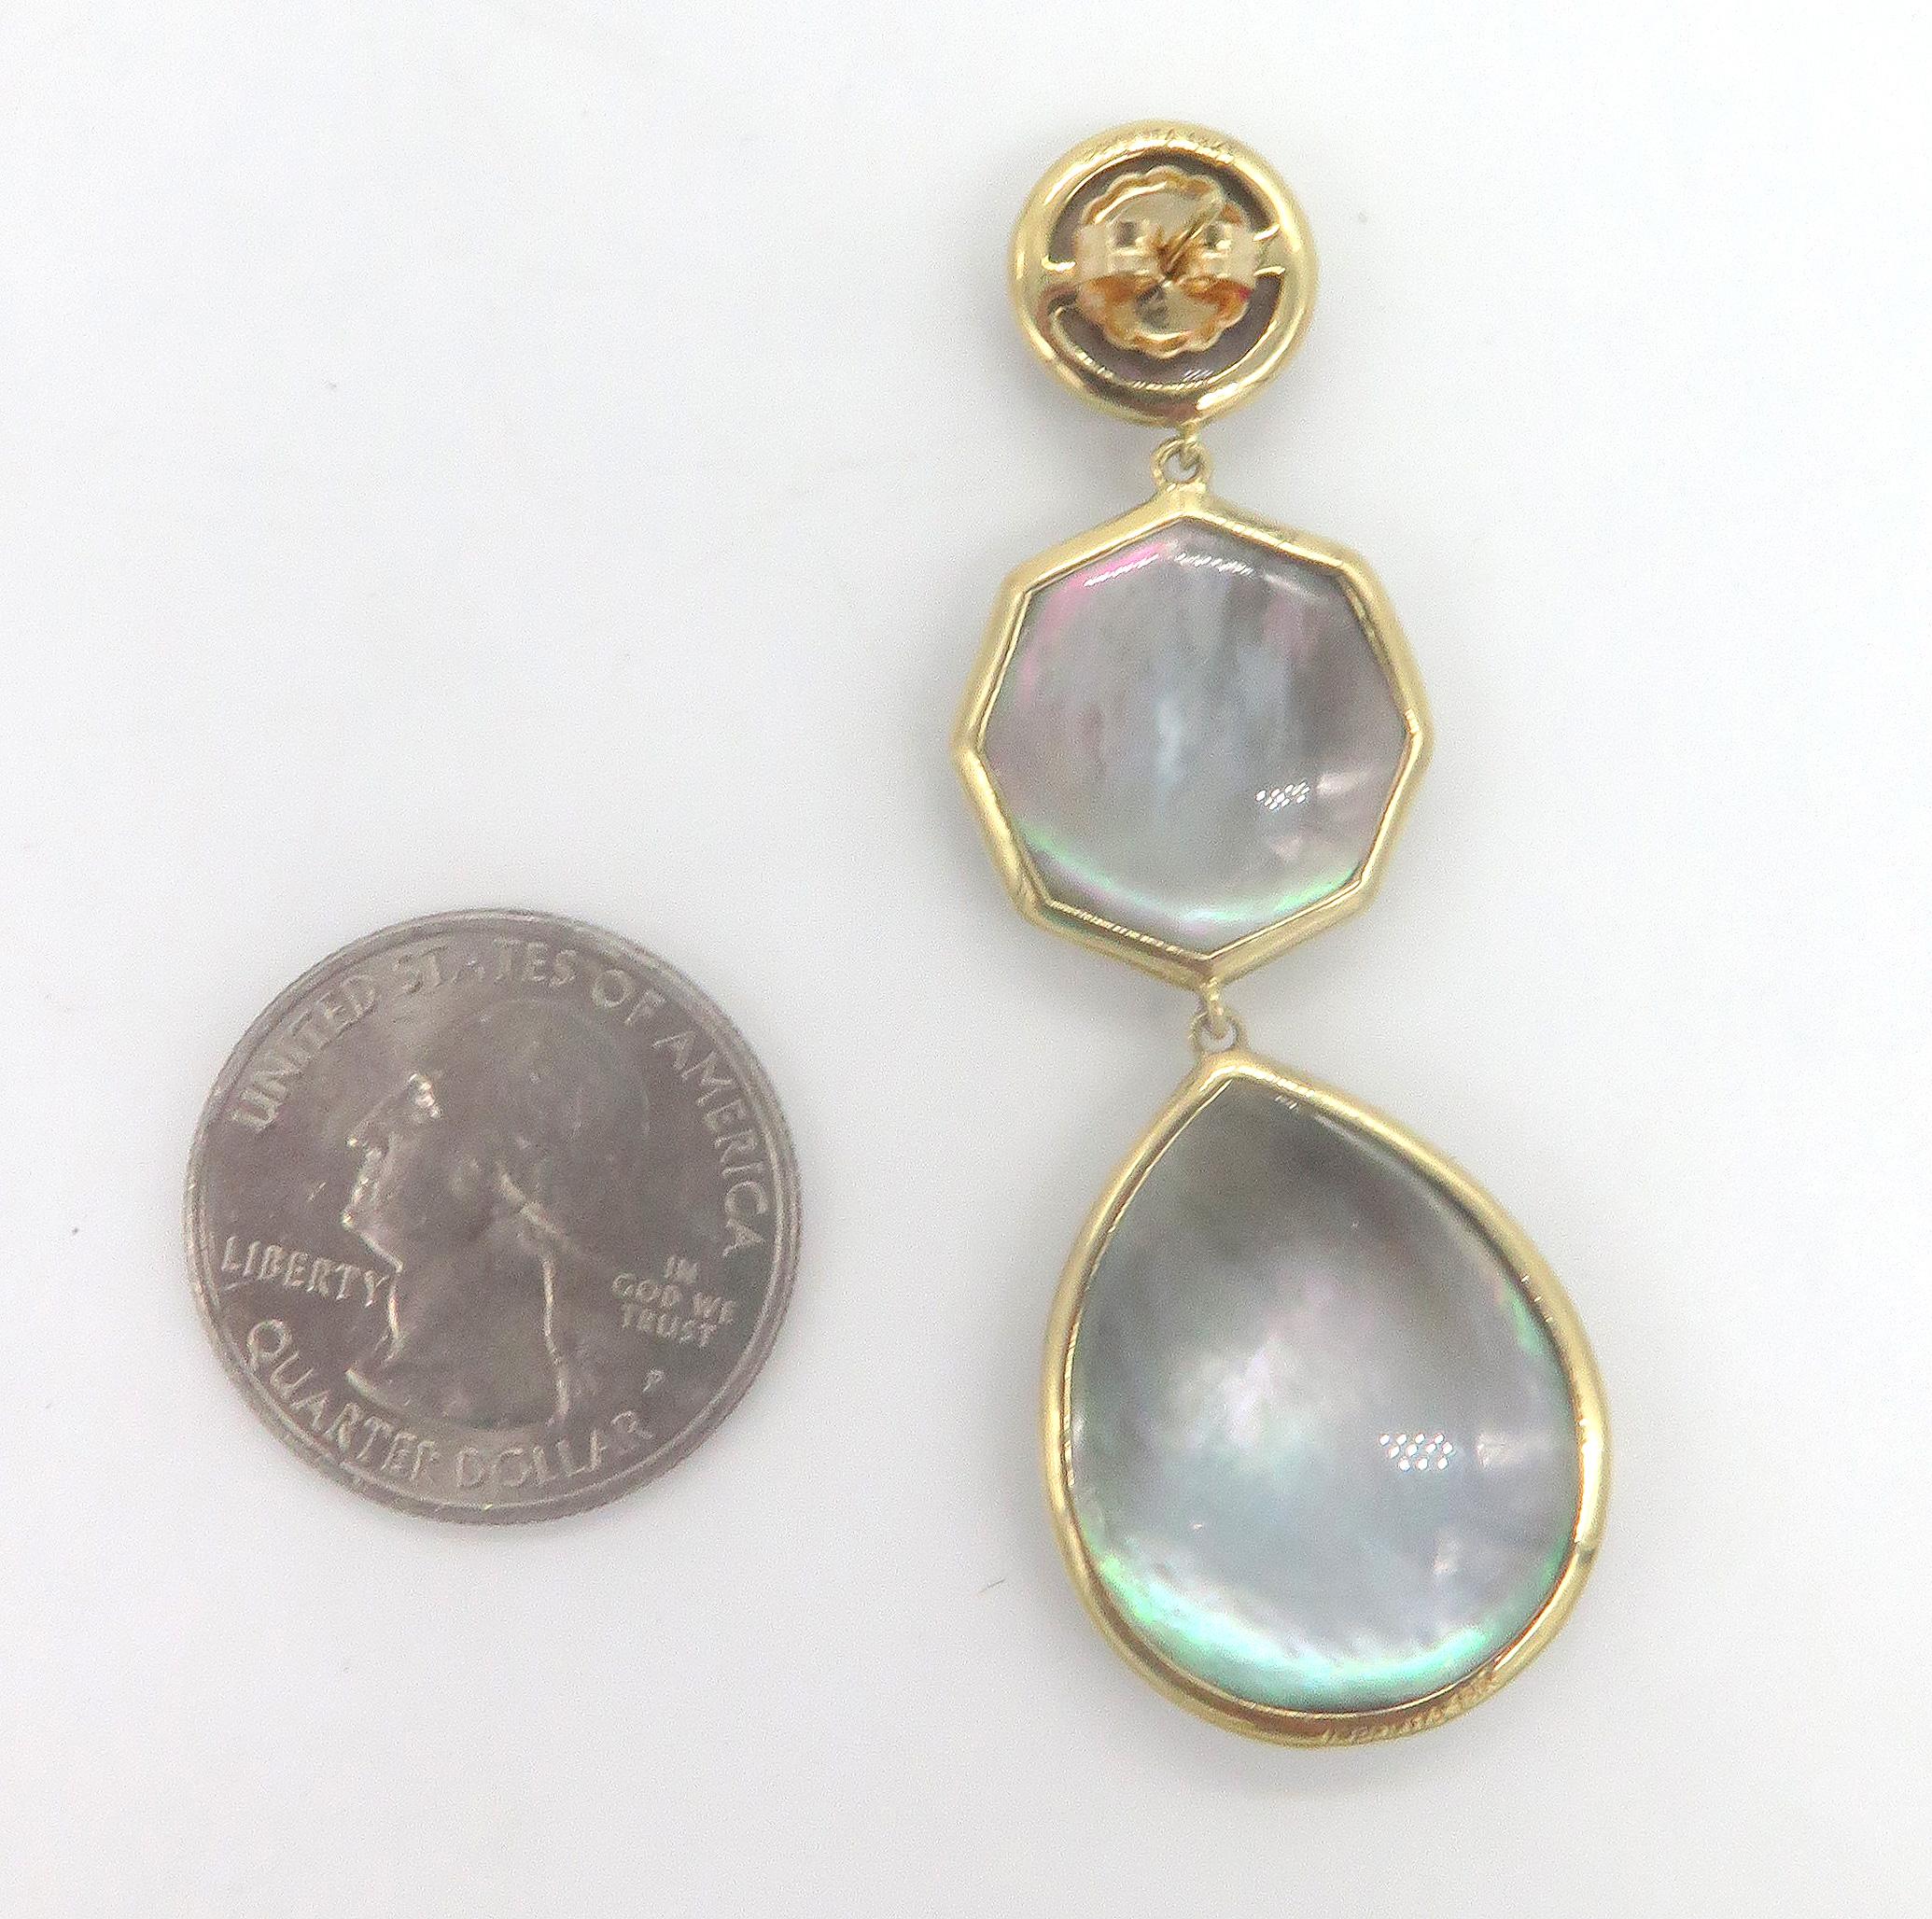 18 Karat Yellow Gold with a Carved Mother of Pear Ippolita Dangle Earrings In Excellent Condition For Sale In West Palm Beach, FL